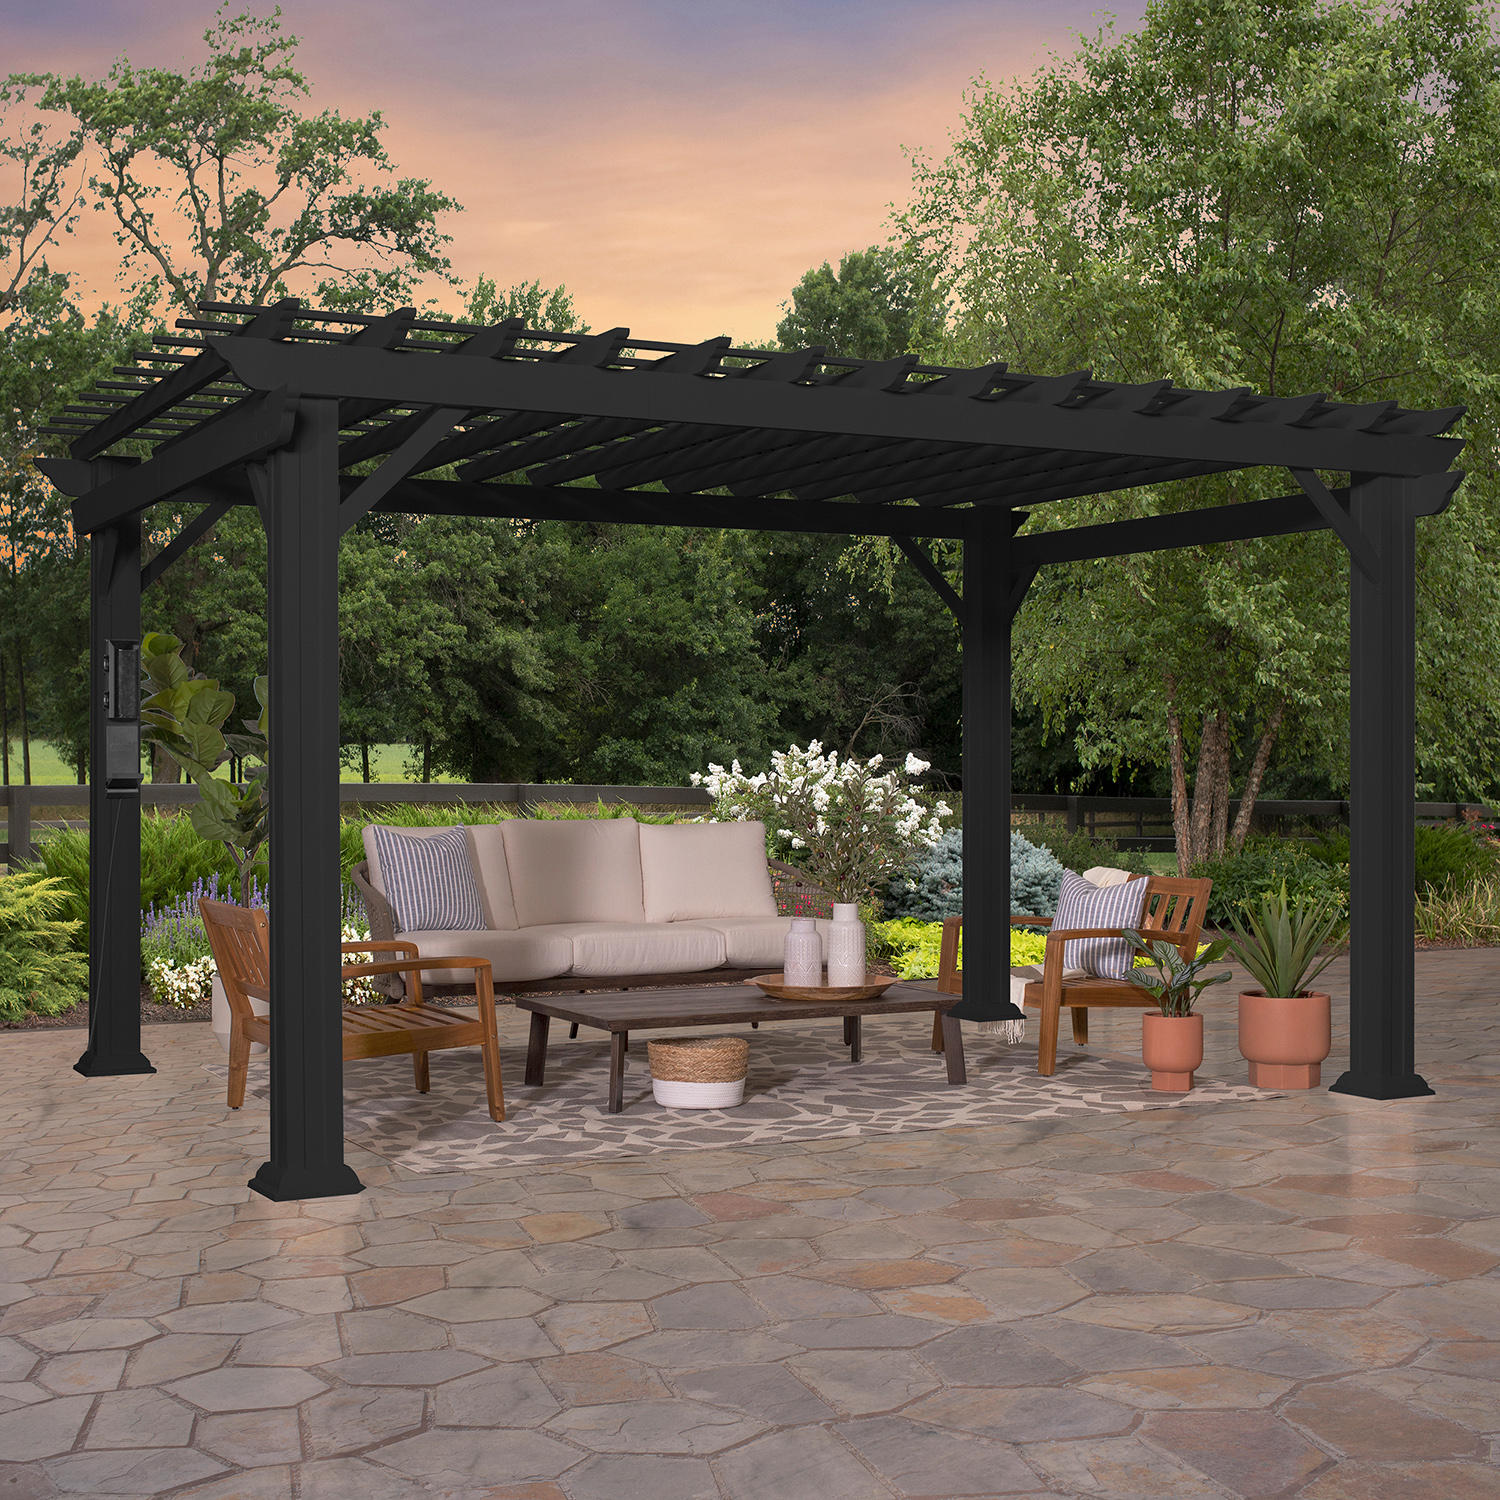 Backyard Discovery 14' x 12' Stratford Traditional Steel Pergola with Sail Shade Soft Canopy DIY